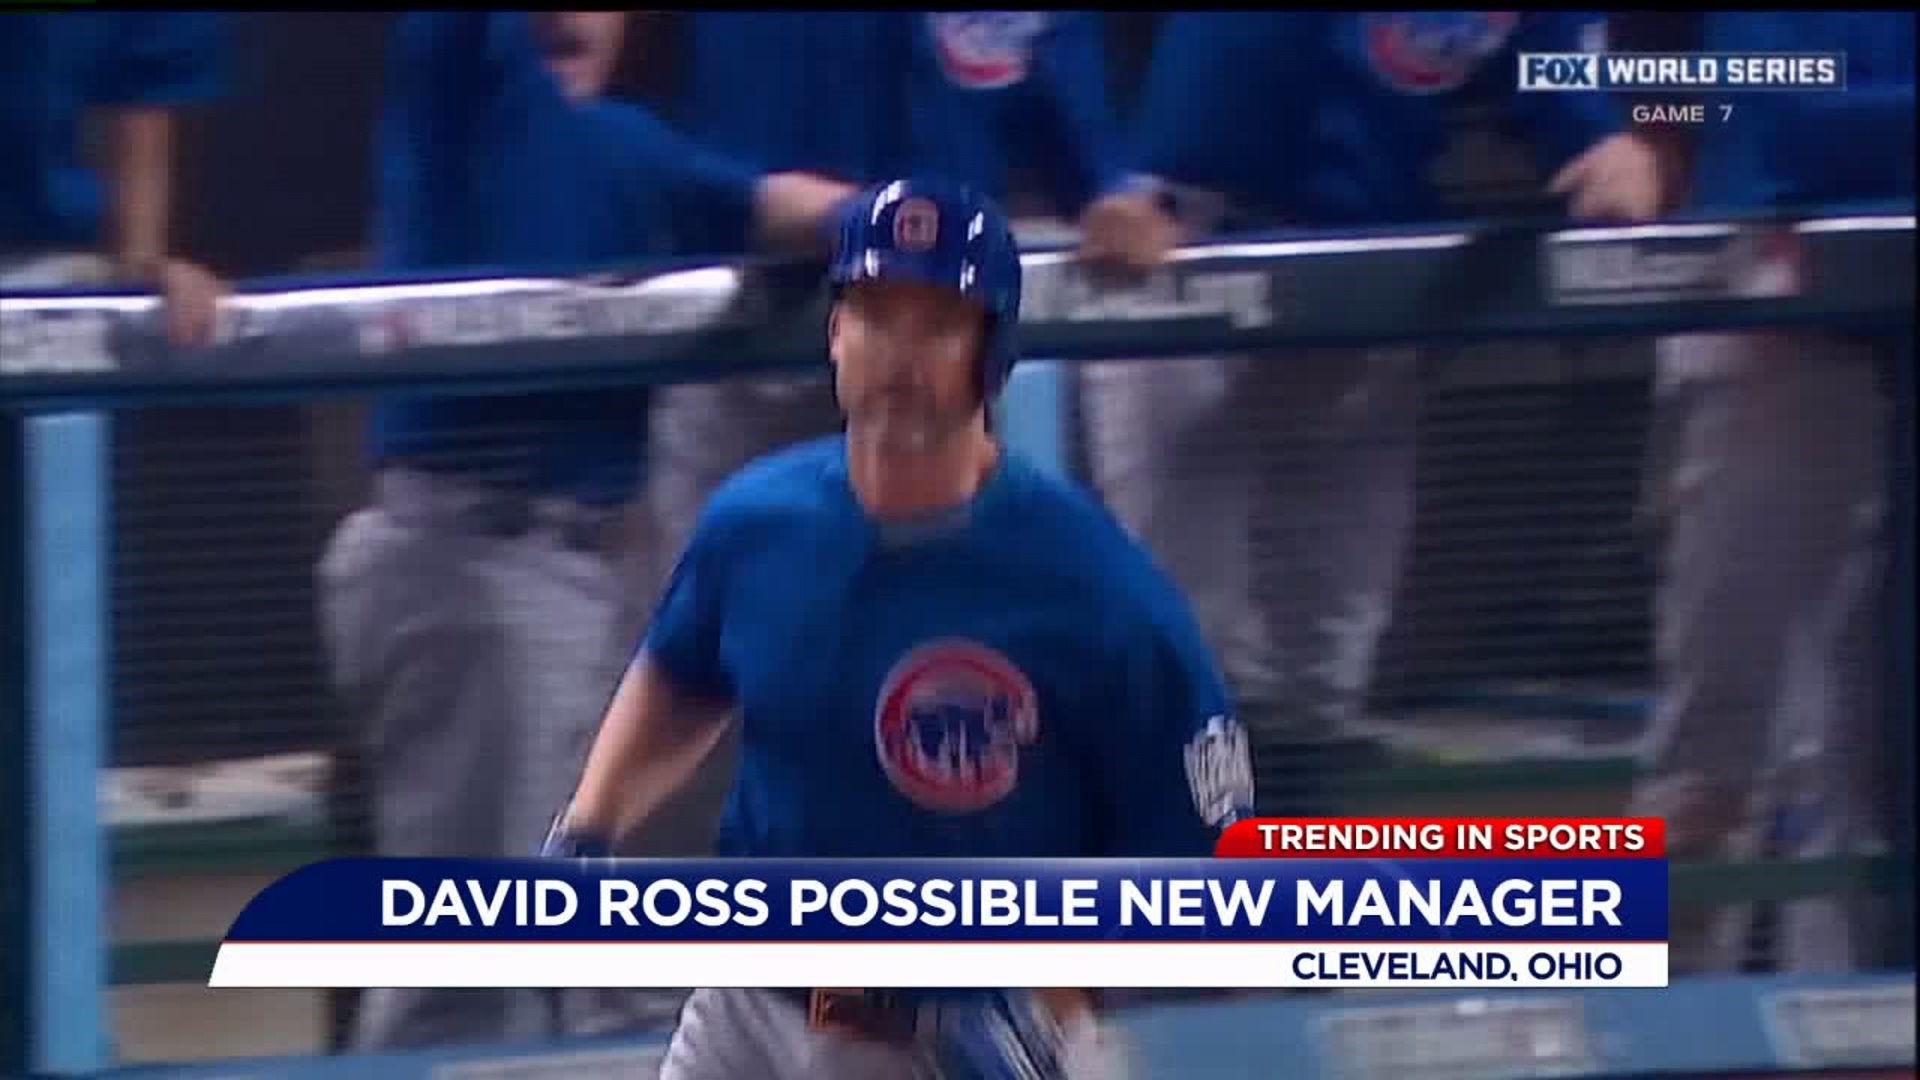 David Ross mentioned as possible replacement for Cubs Manager Joe Maddon